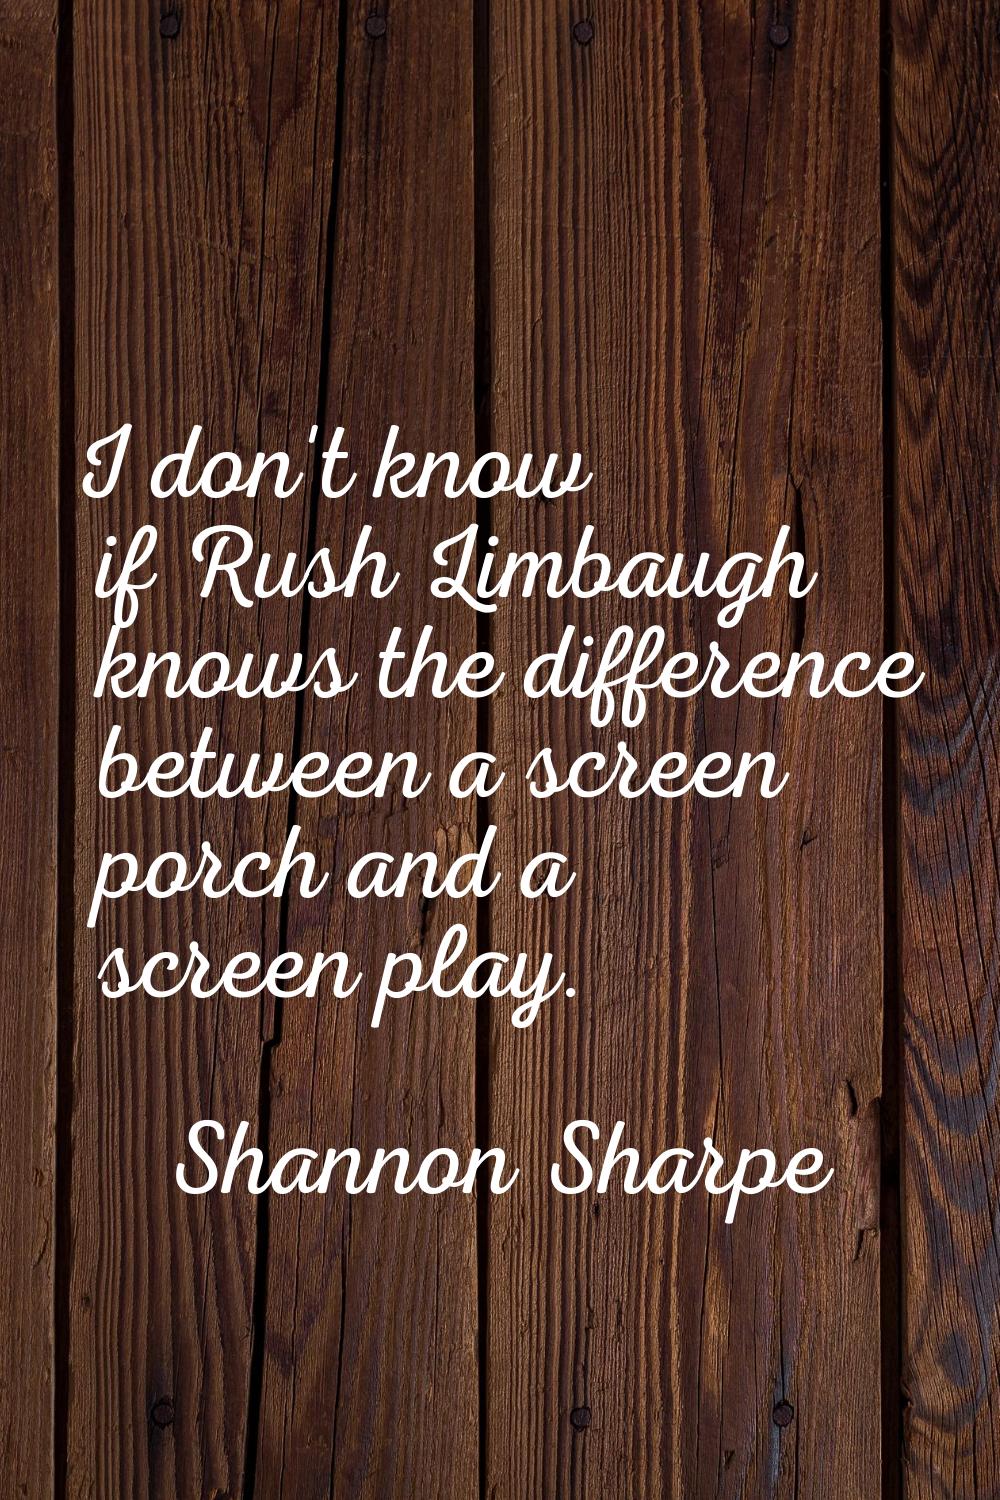 I don't know if Rush Limbaugh knows the difference between a screen porch and a screen play.